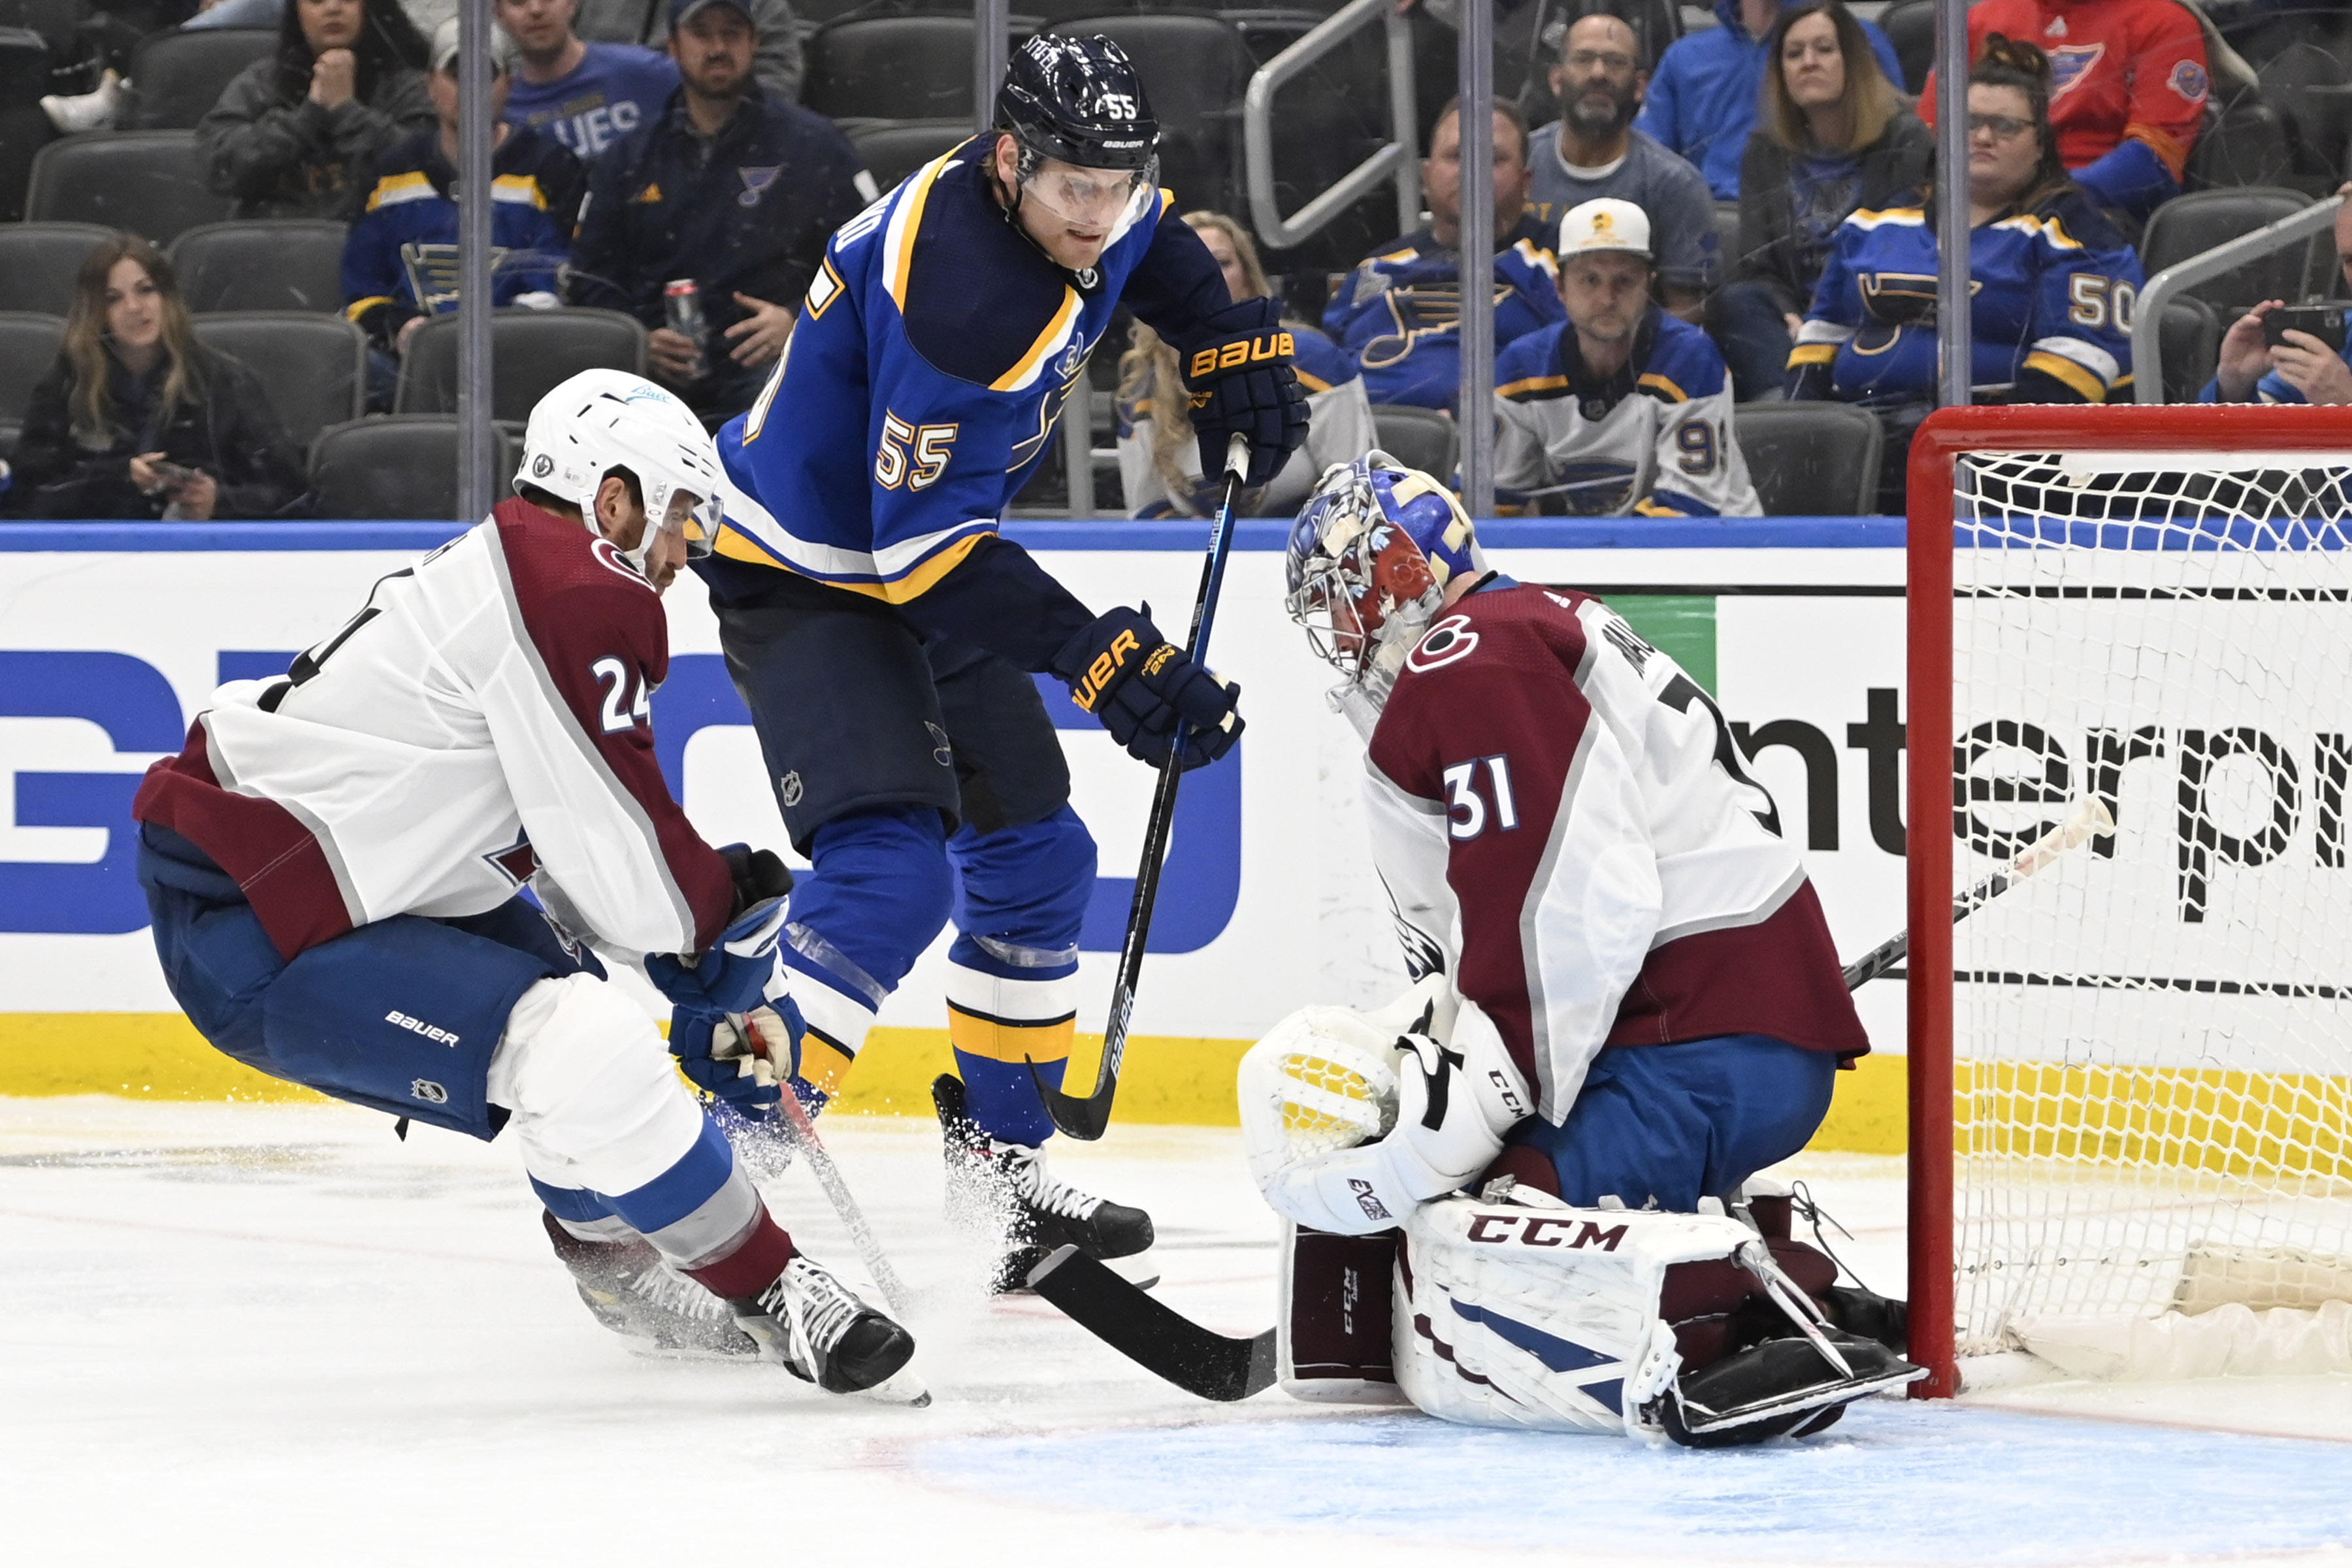 NHL: Stanley Cup Playoffs-Colorado Avalanche at St. Louis Blues